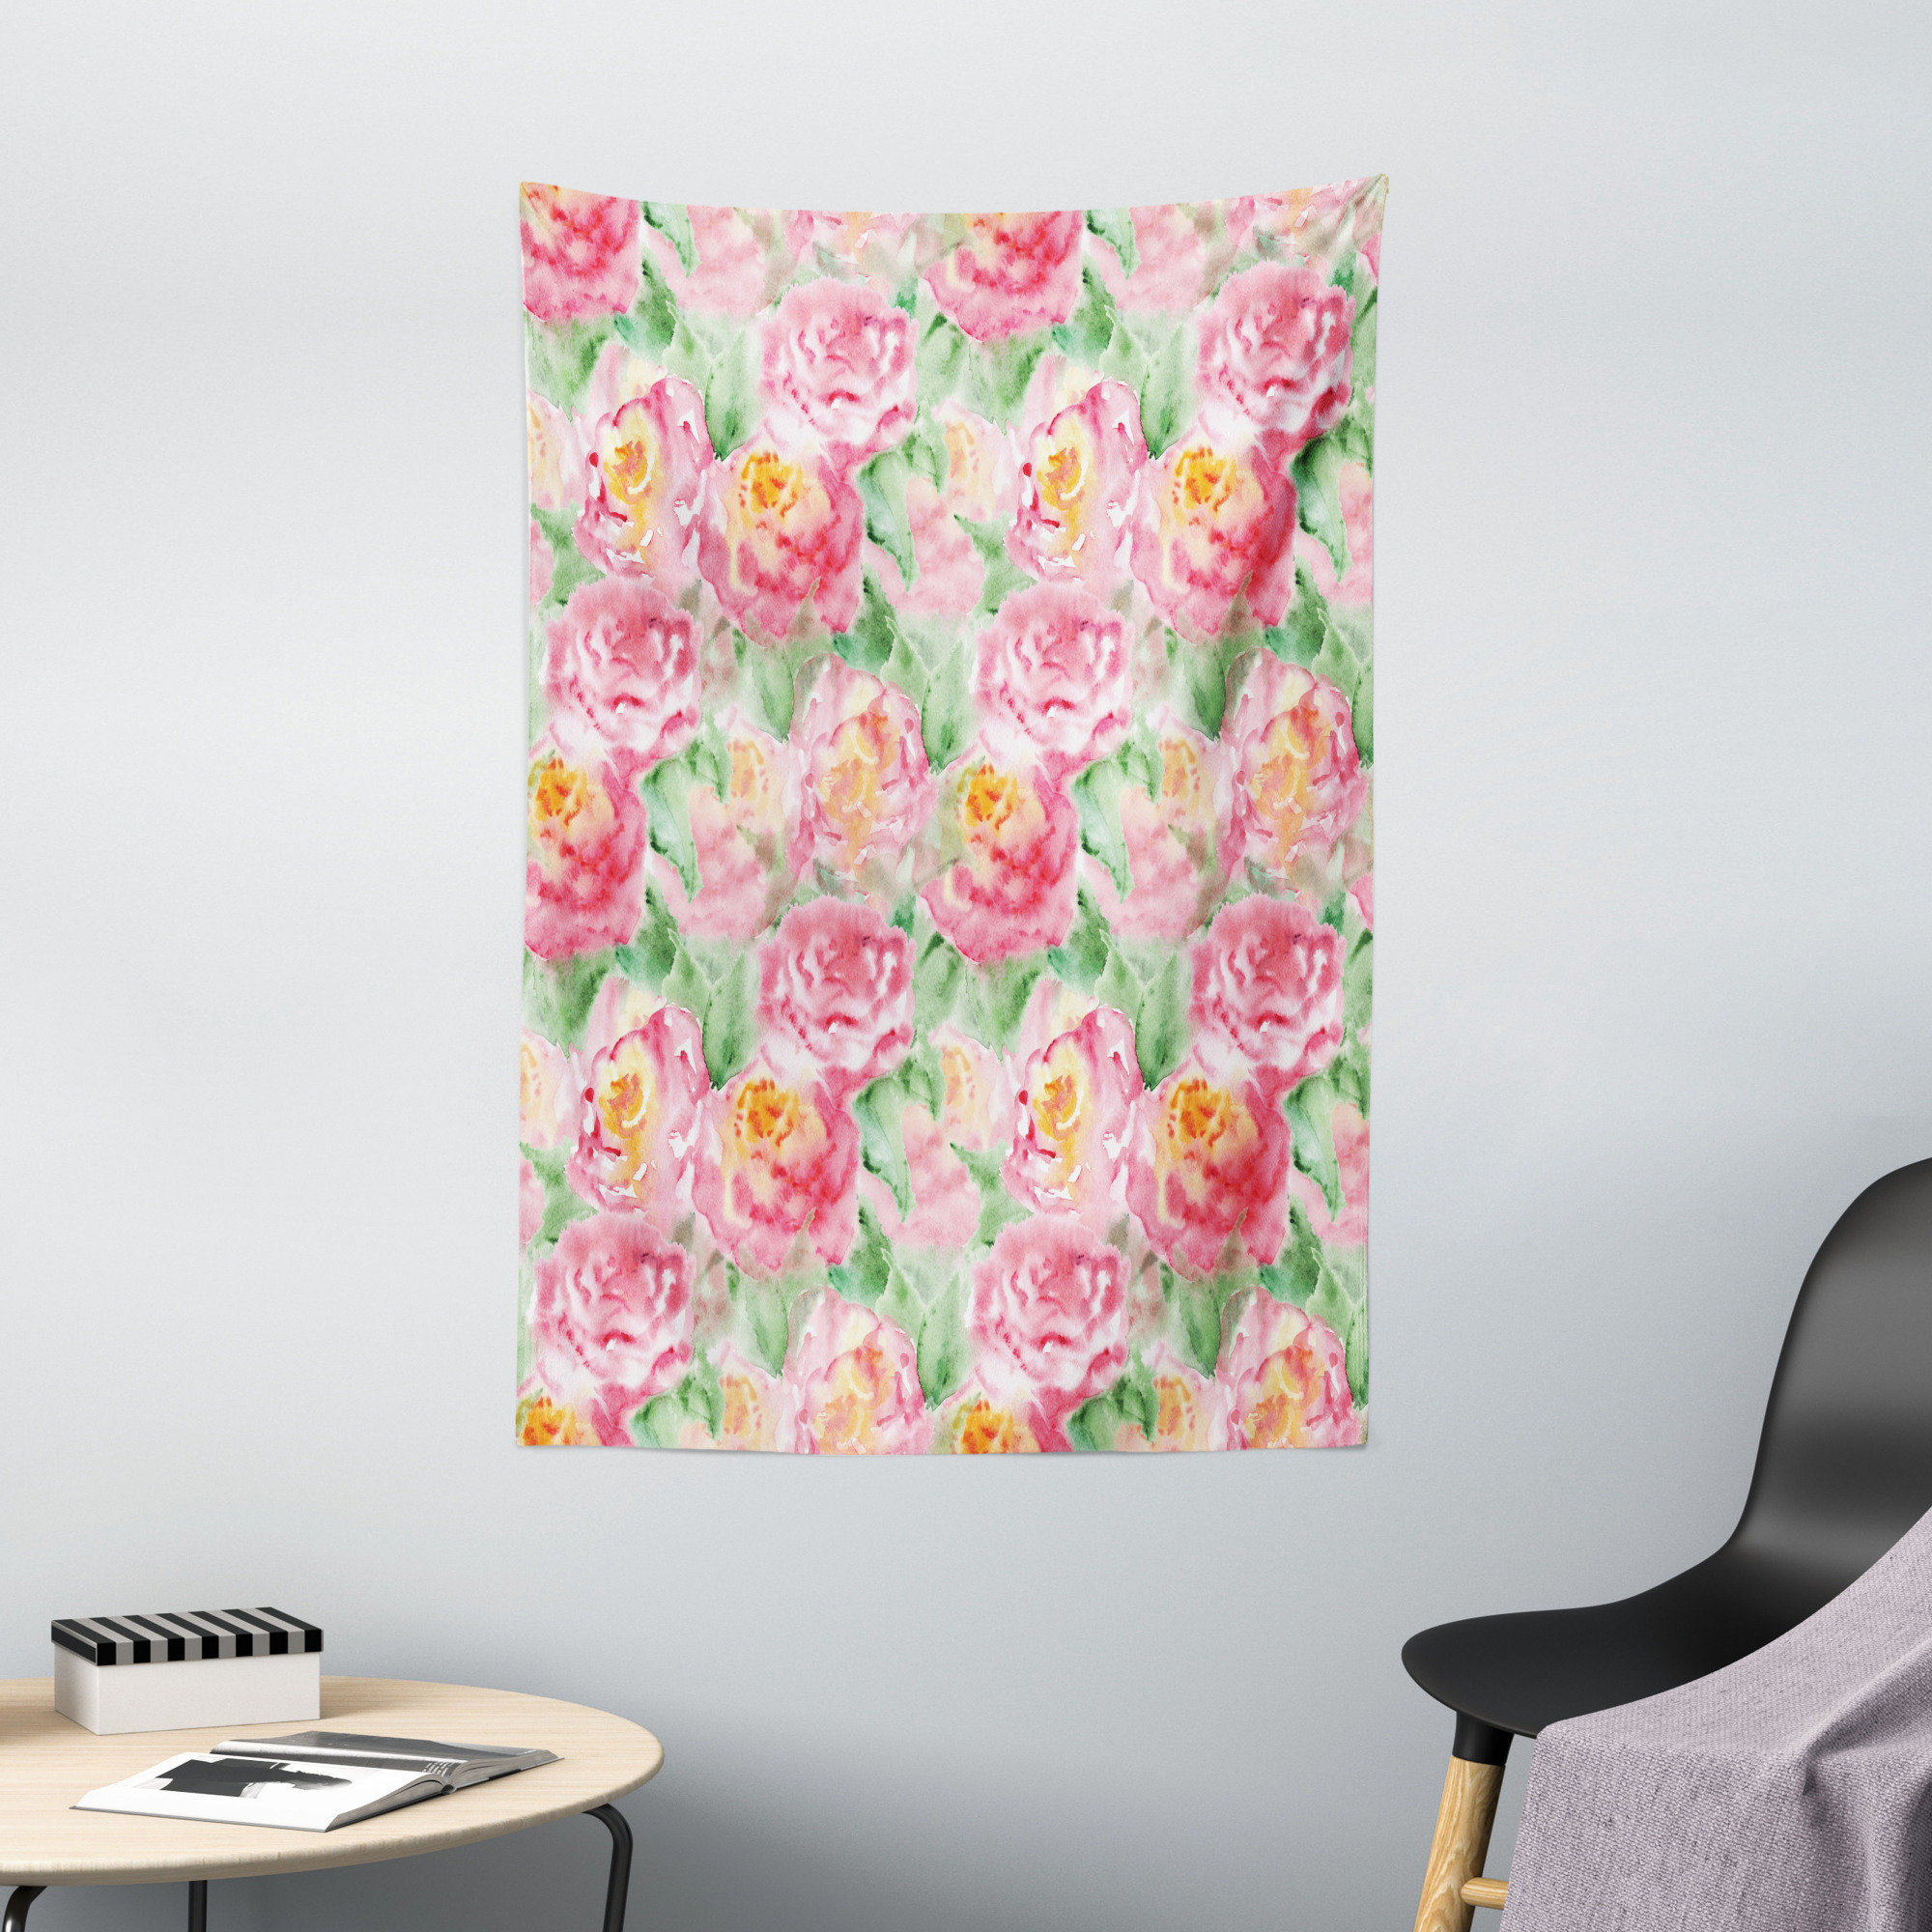 Wall Hanging for Bedroom Living Room Dorm Decor Green Pink Romantic Summer Theme Rose Blossoms Ornate Vintage Art 40 X 60 Ambesonne Watercolor Flower Tapestry 